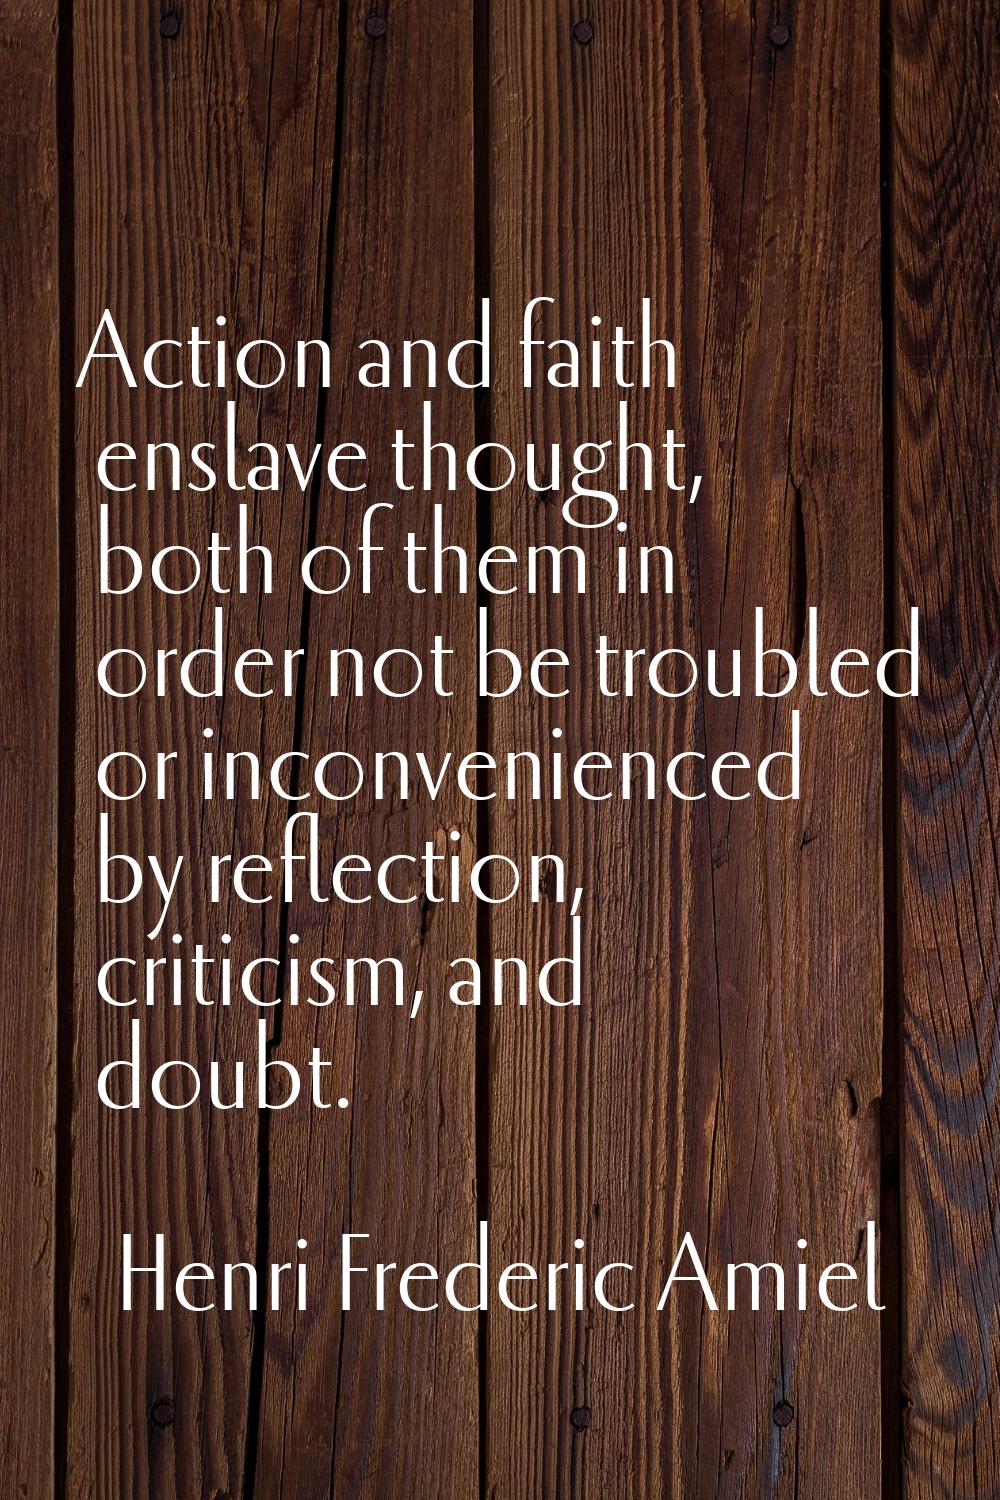 Action and faith enslave thought, both of them in order not be troubled or inconvenienced by reflec